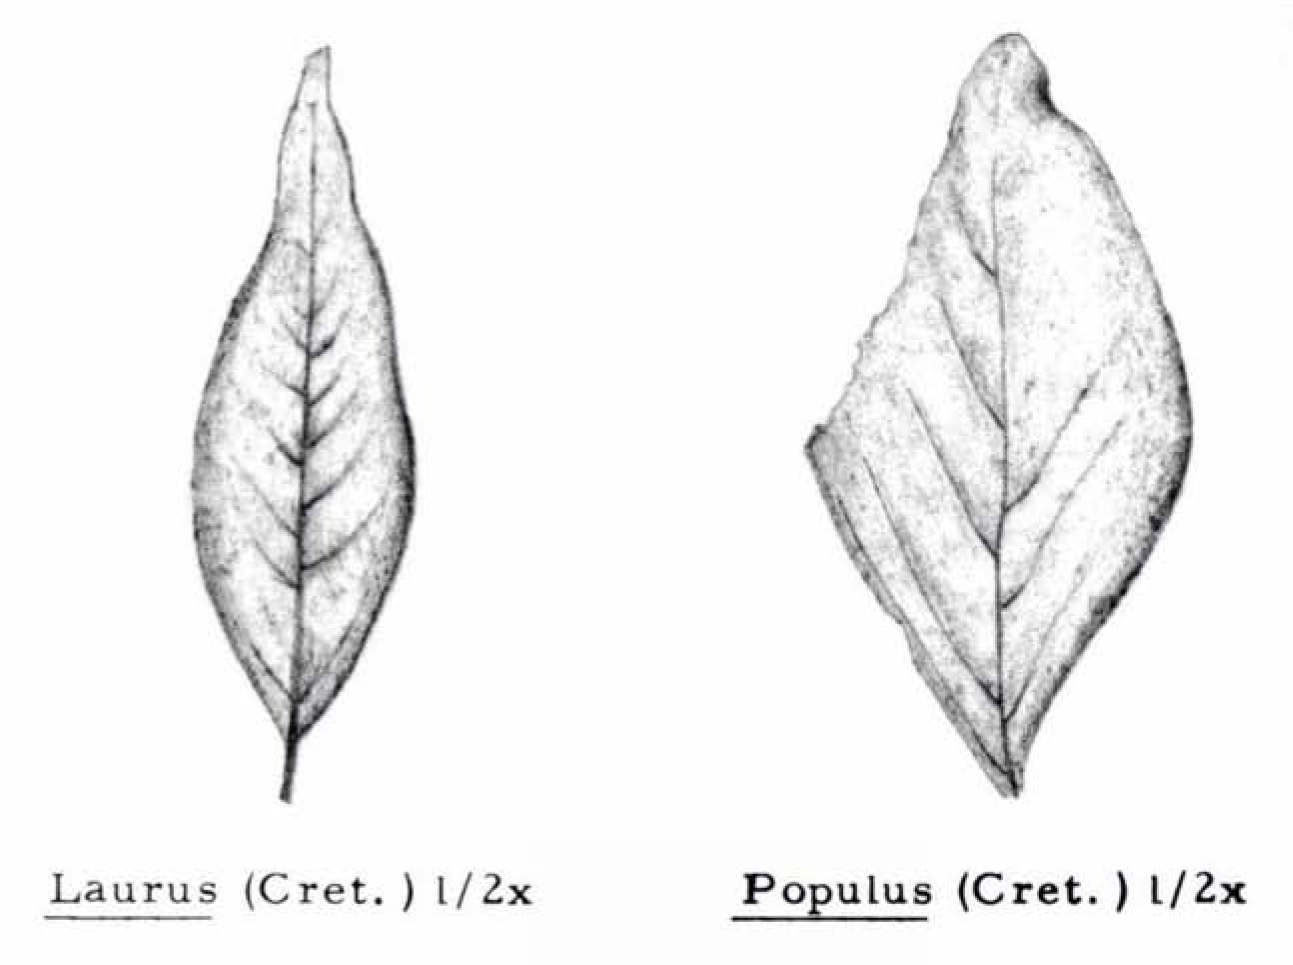 Drawings of fossil leaves from Cretaceous deposits.